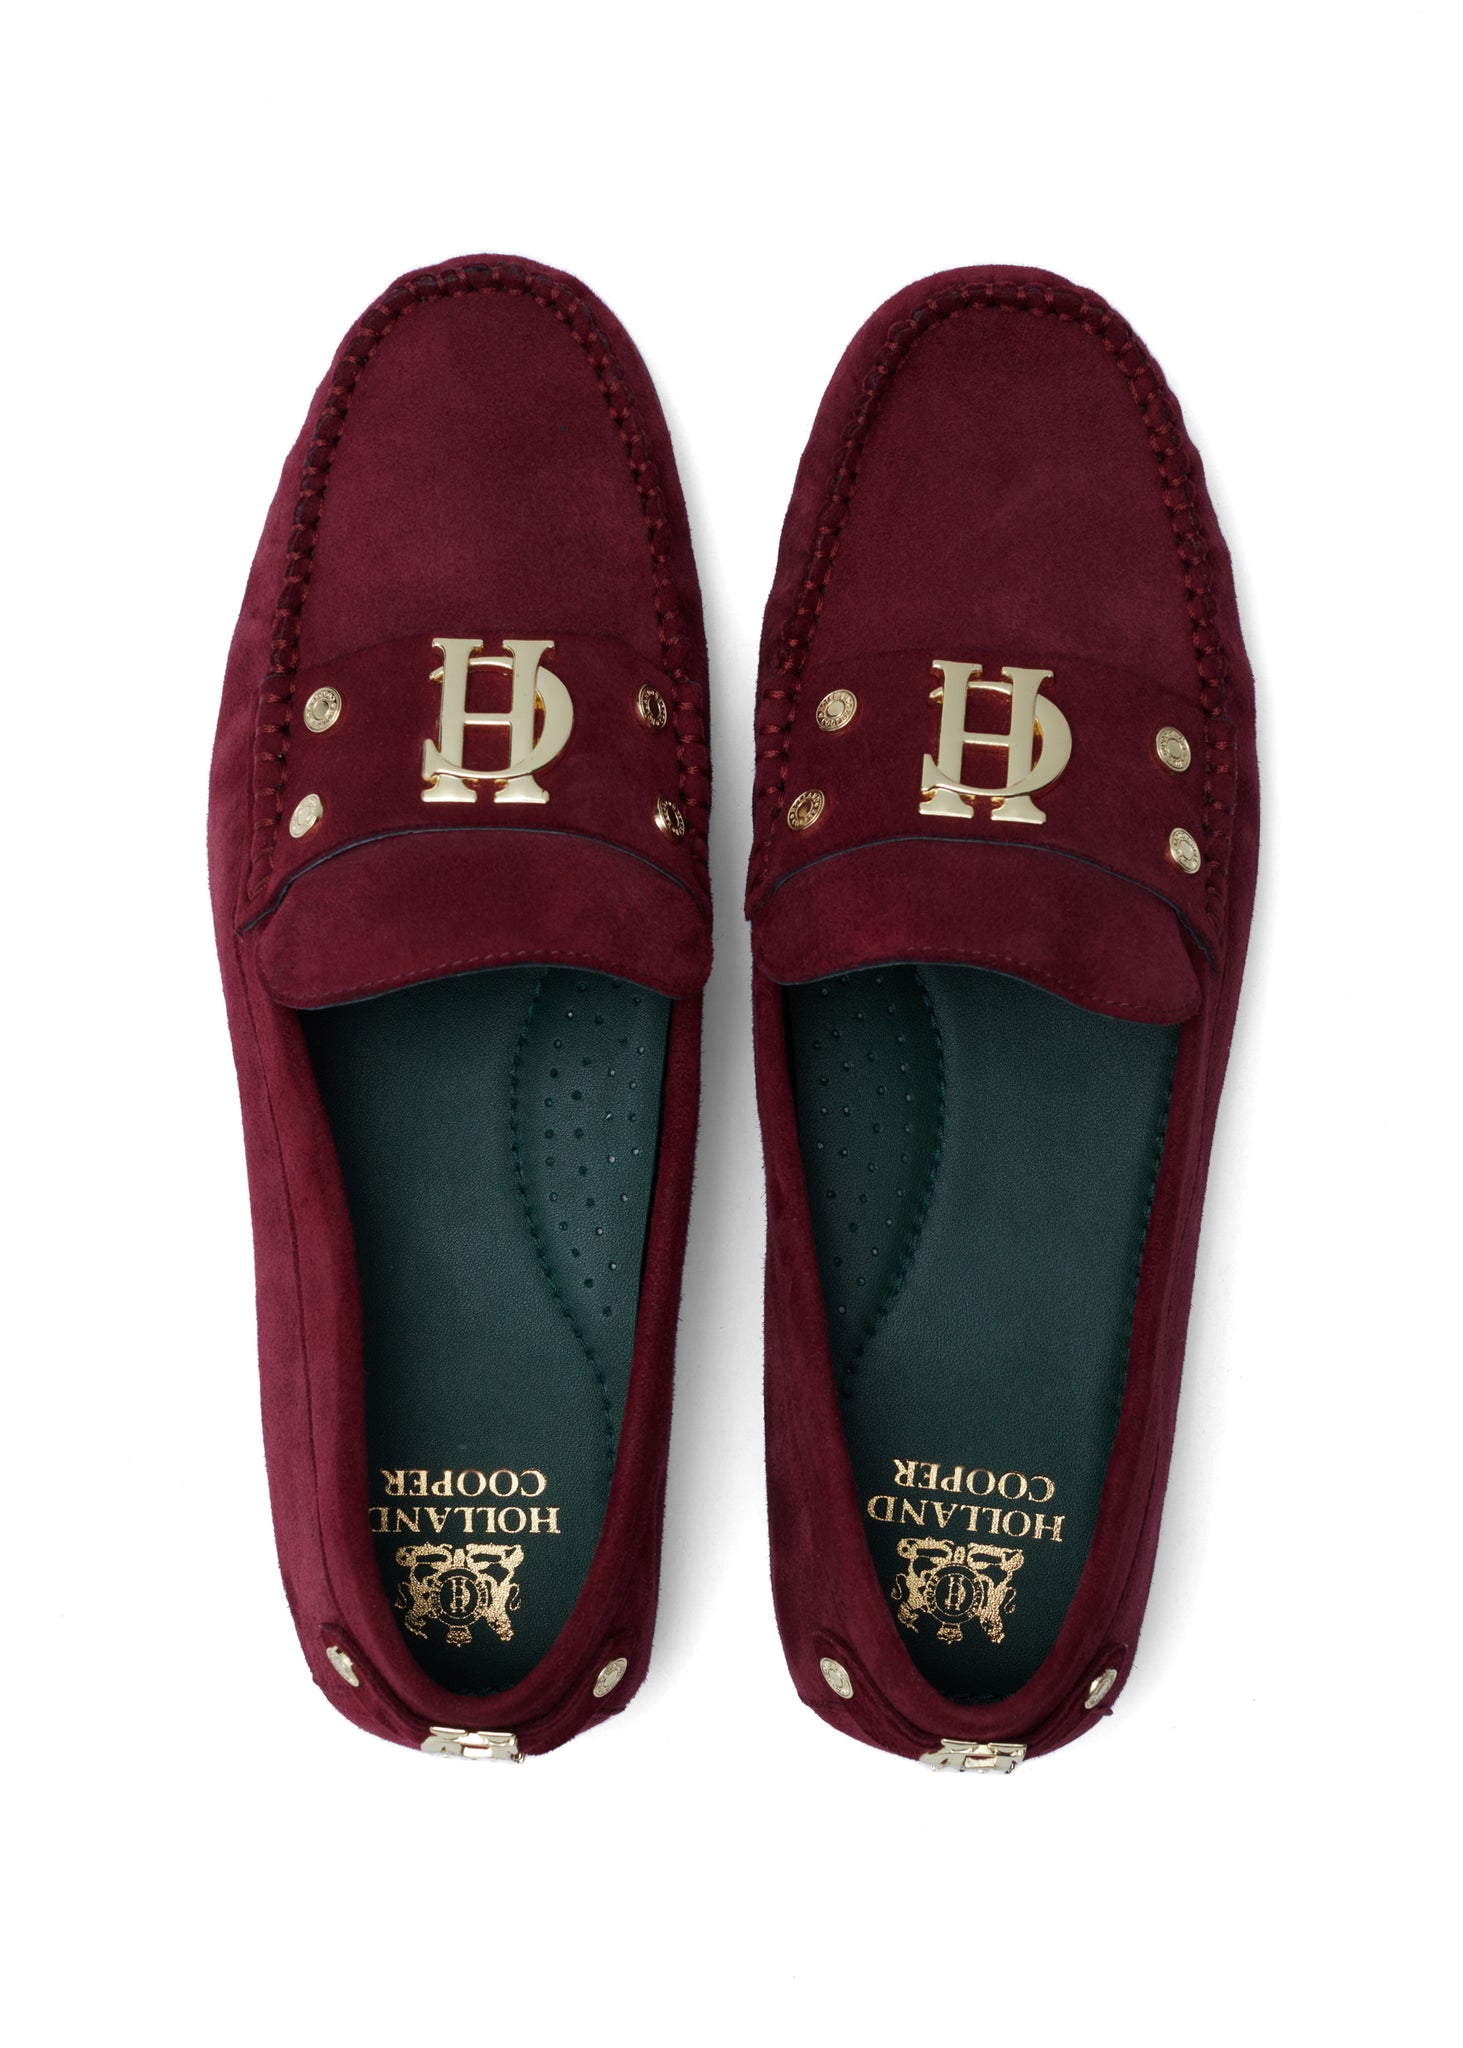 classic deep red suede loafers with a leather sole and top stitching details and gold hardware with a dark green inner sole